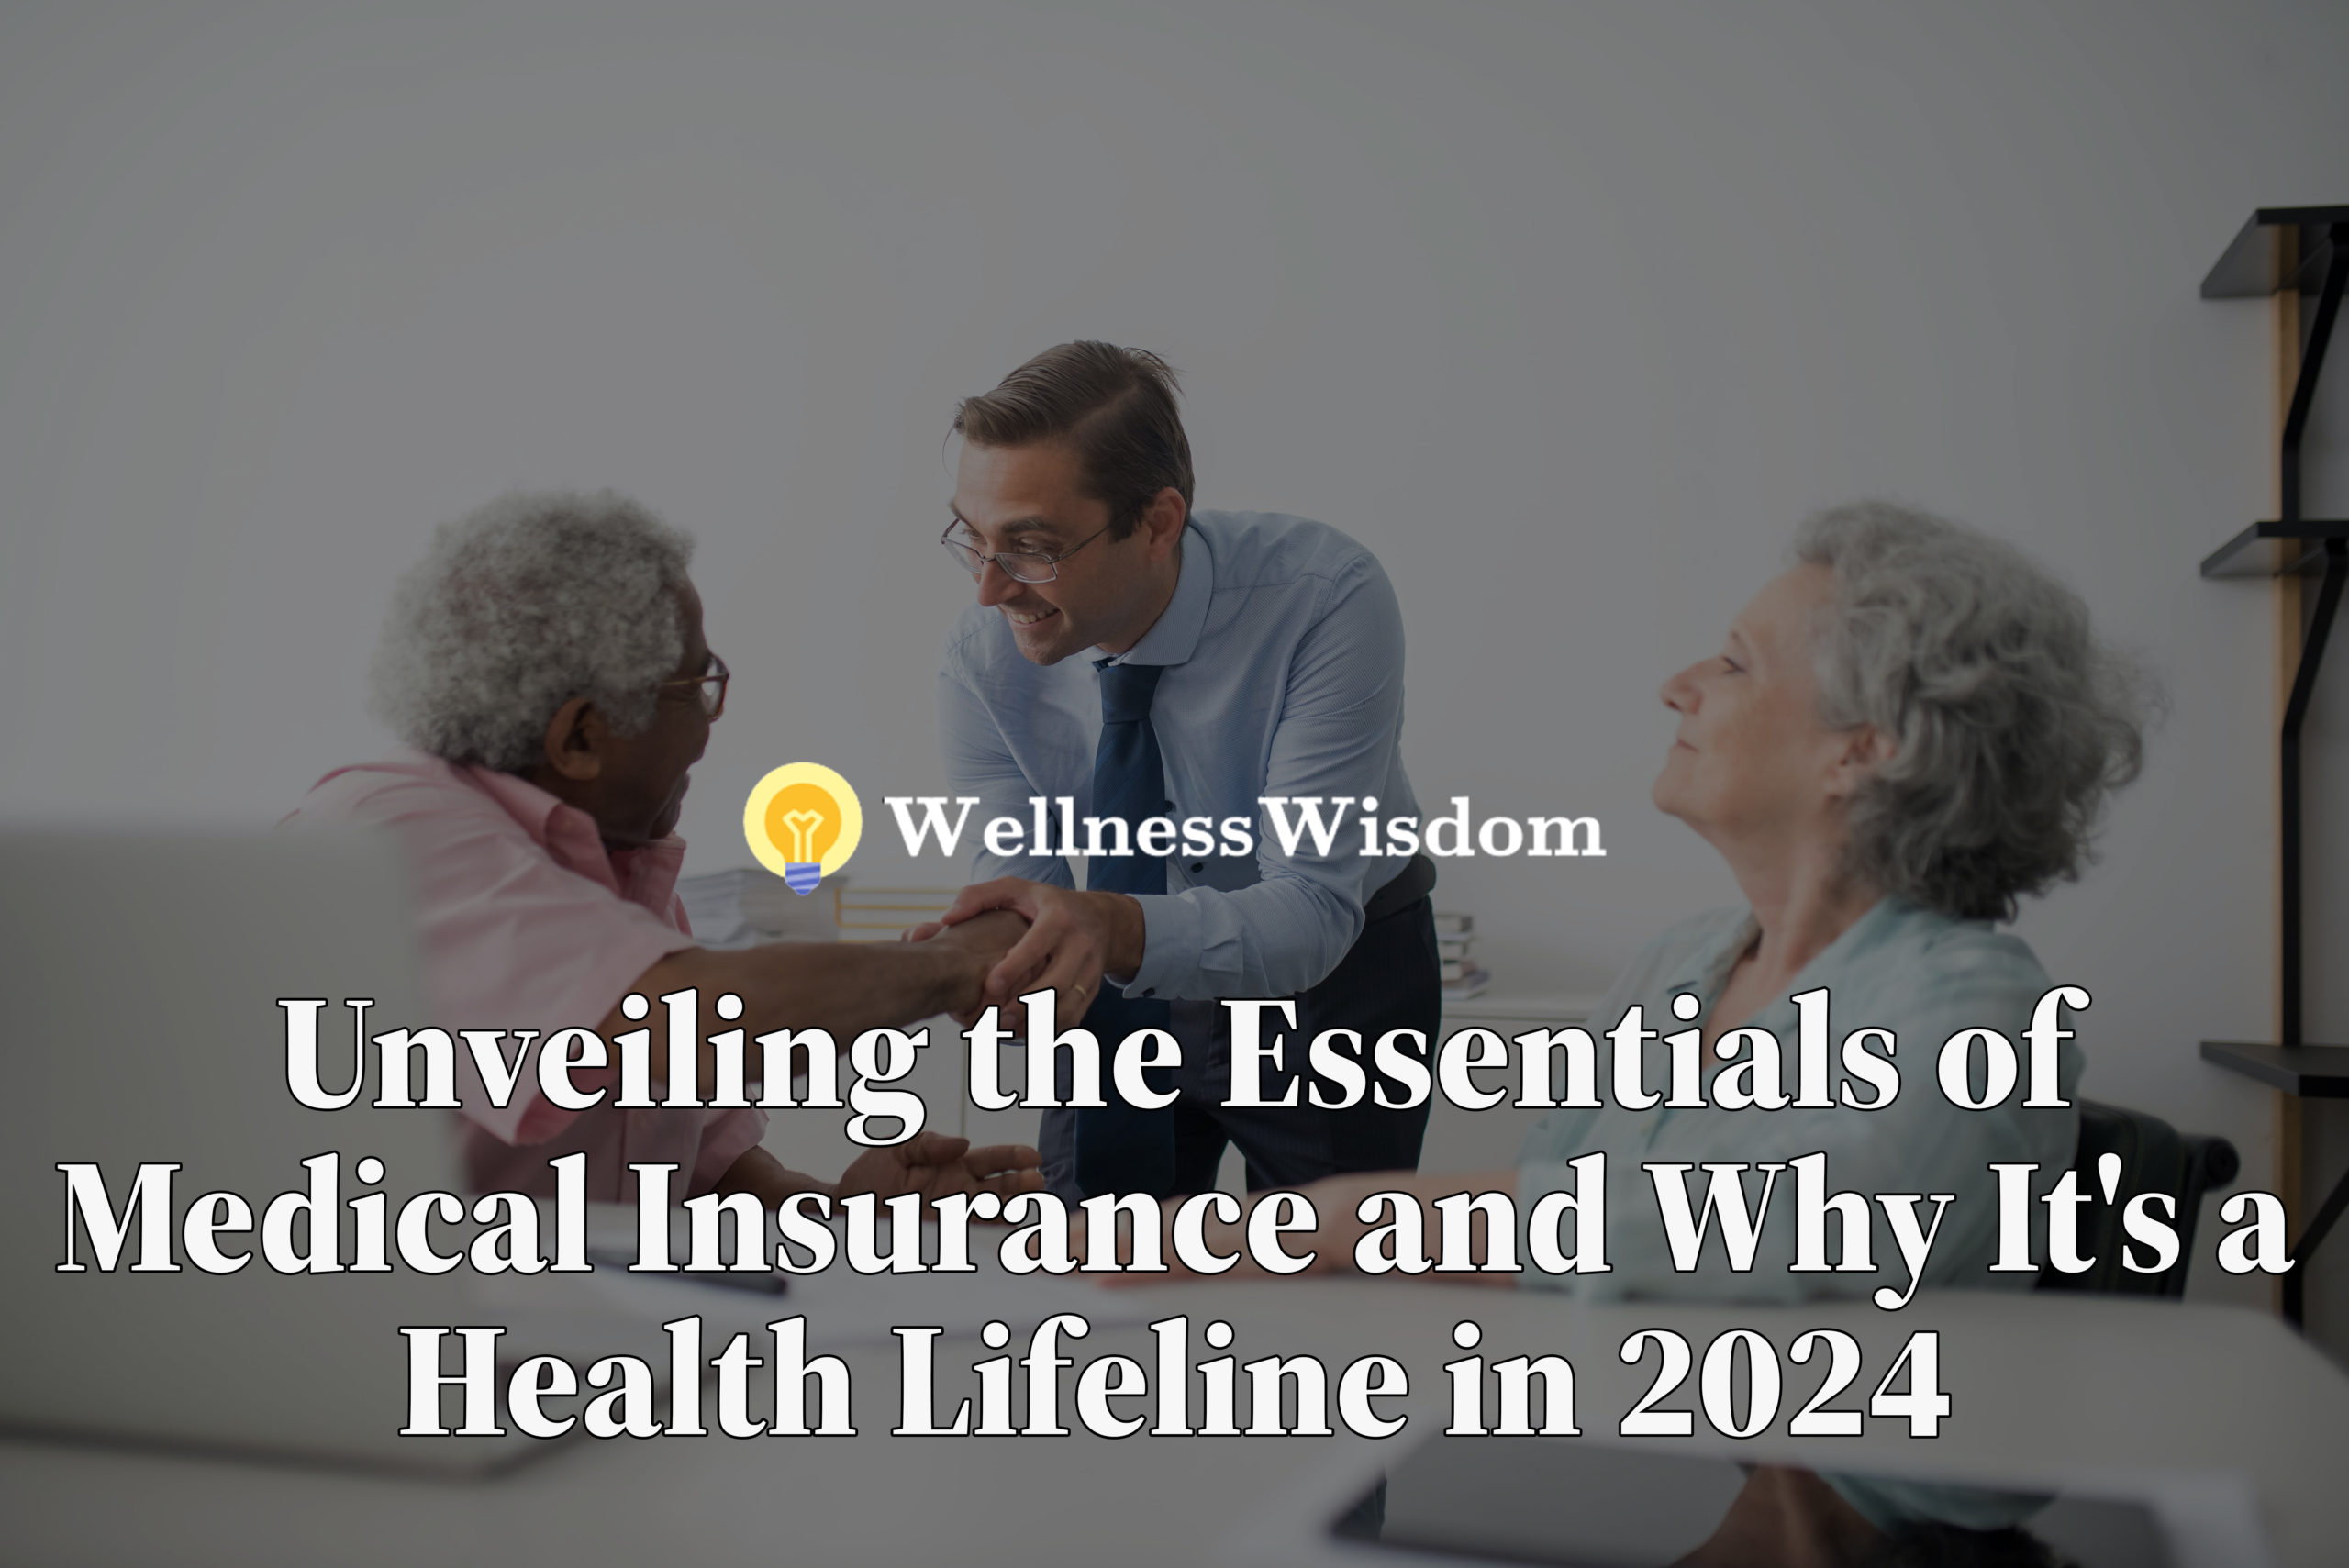 medical insurance, health insurance, healthcare coverage, financial protection, access to healthcare, preventive care, catastrophic health events, peace of mind, insurance benefits, healthcare affordability